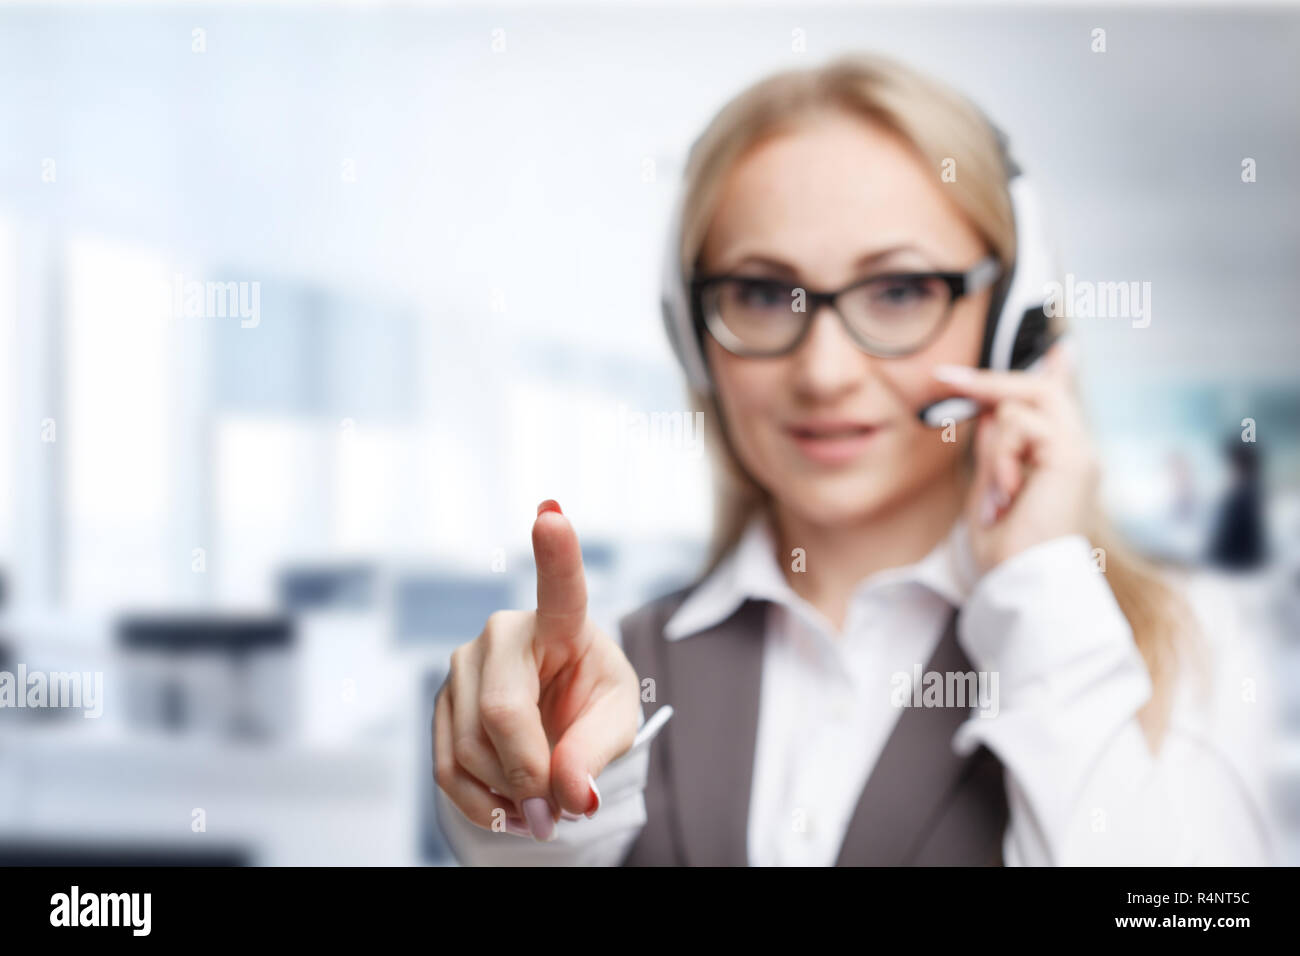 Three call center service operators at work. Portrait of smiling pretty female helpdesk employee with headset at workplace. Stock Photo